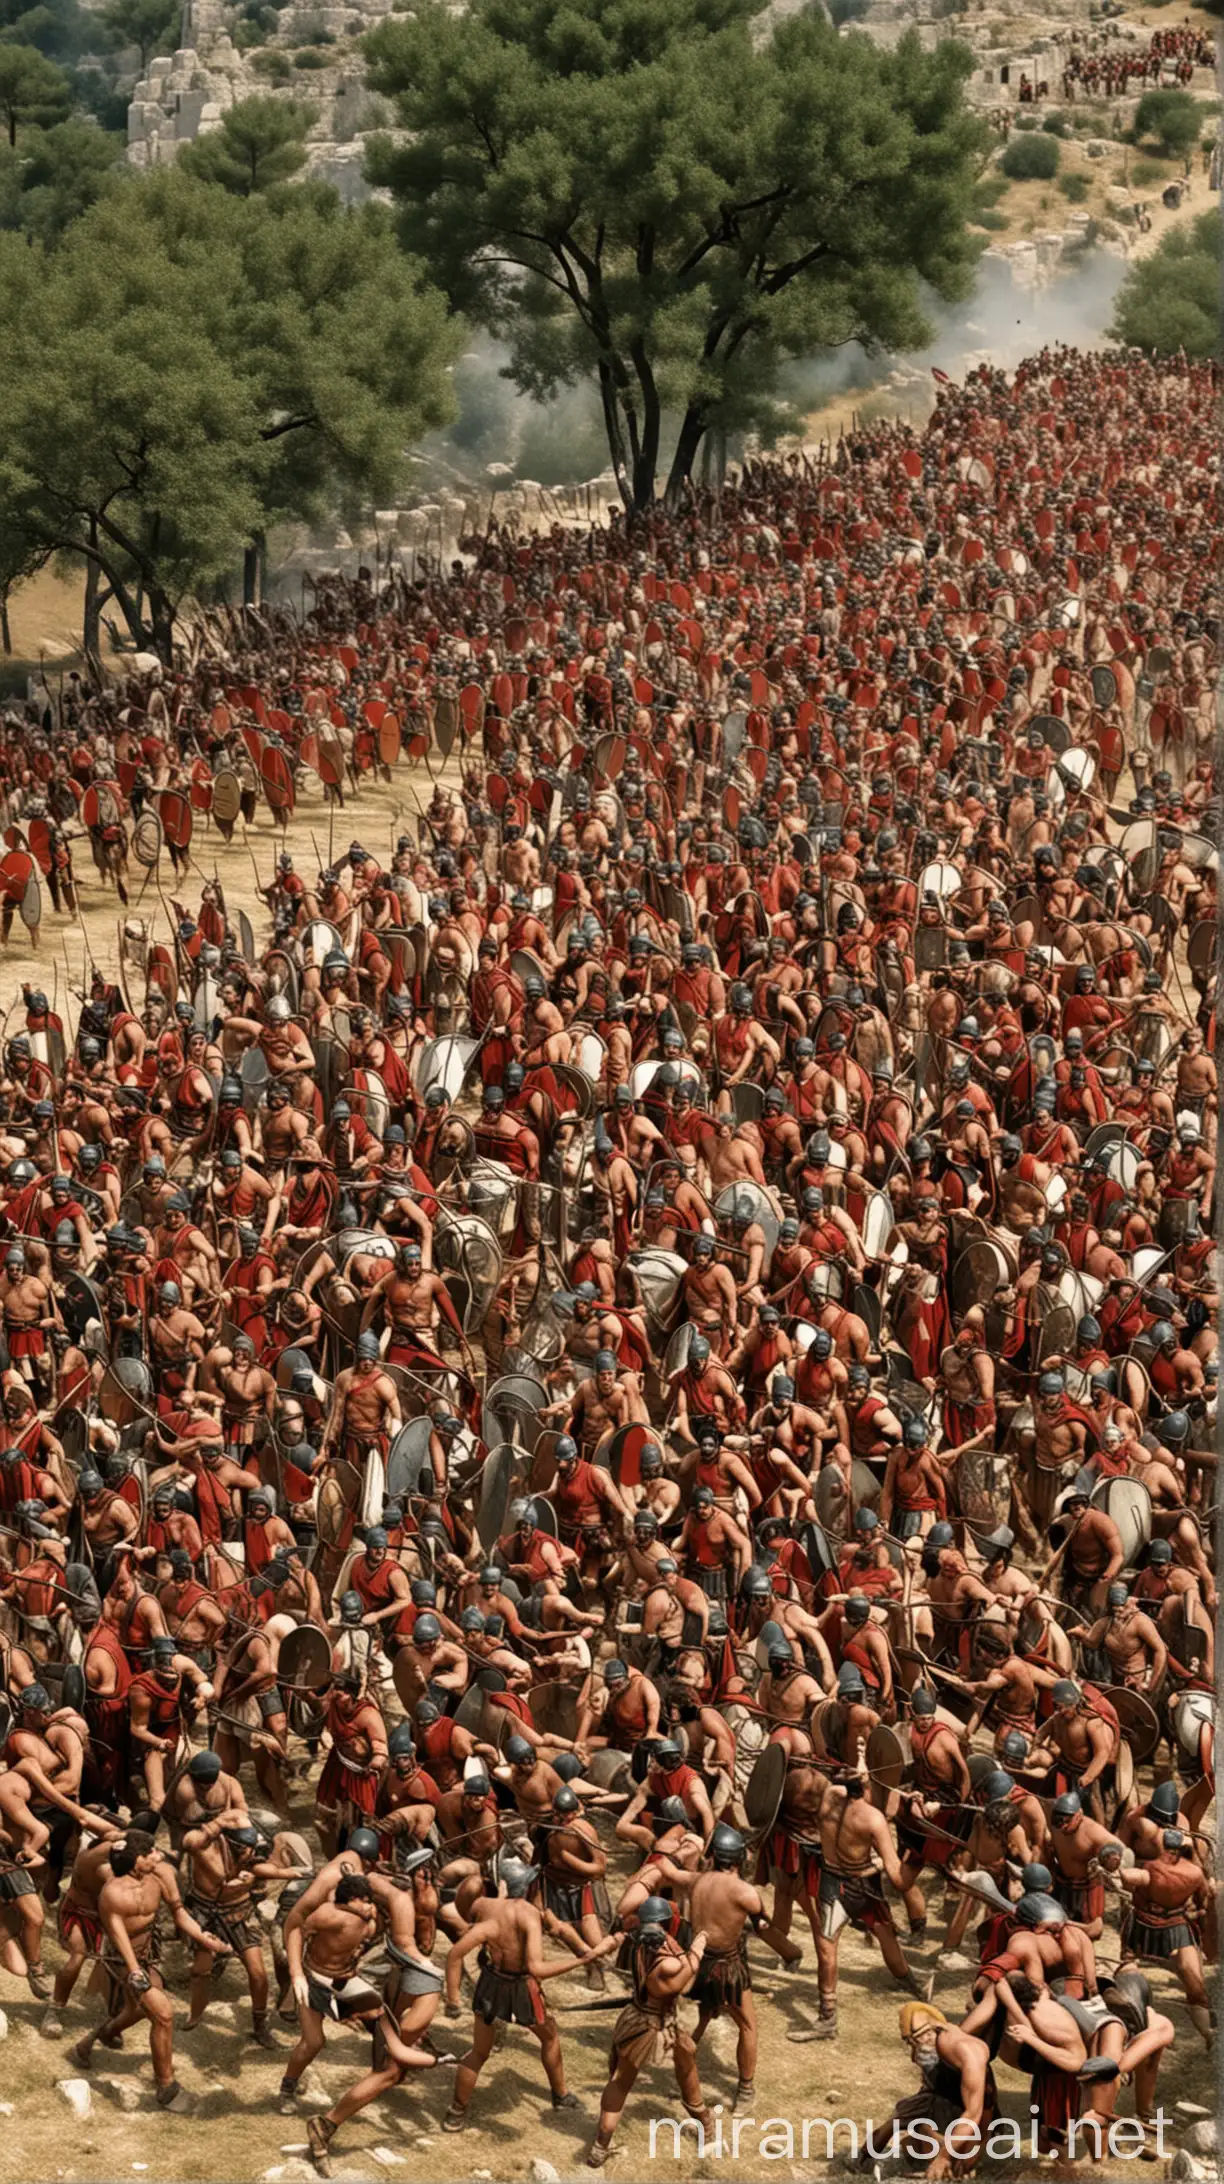 "Another was Thermopylae, where 300 Spartans and their allies held off a massive enemy force for days. These battles showed the hoplites' incredible bravery and teamwork." hyper realistic